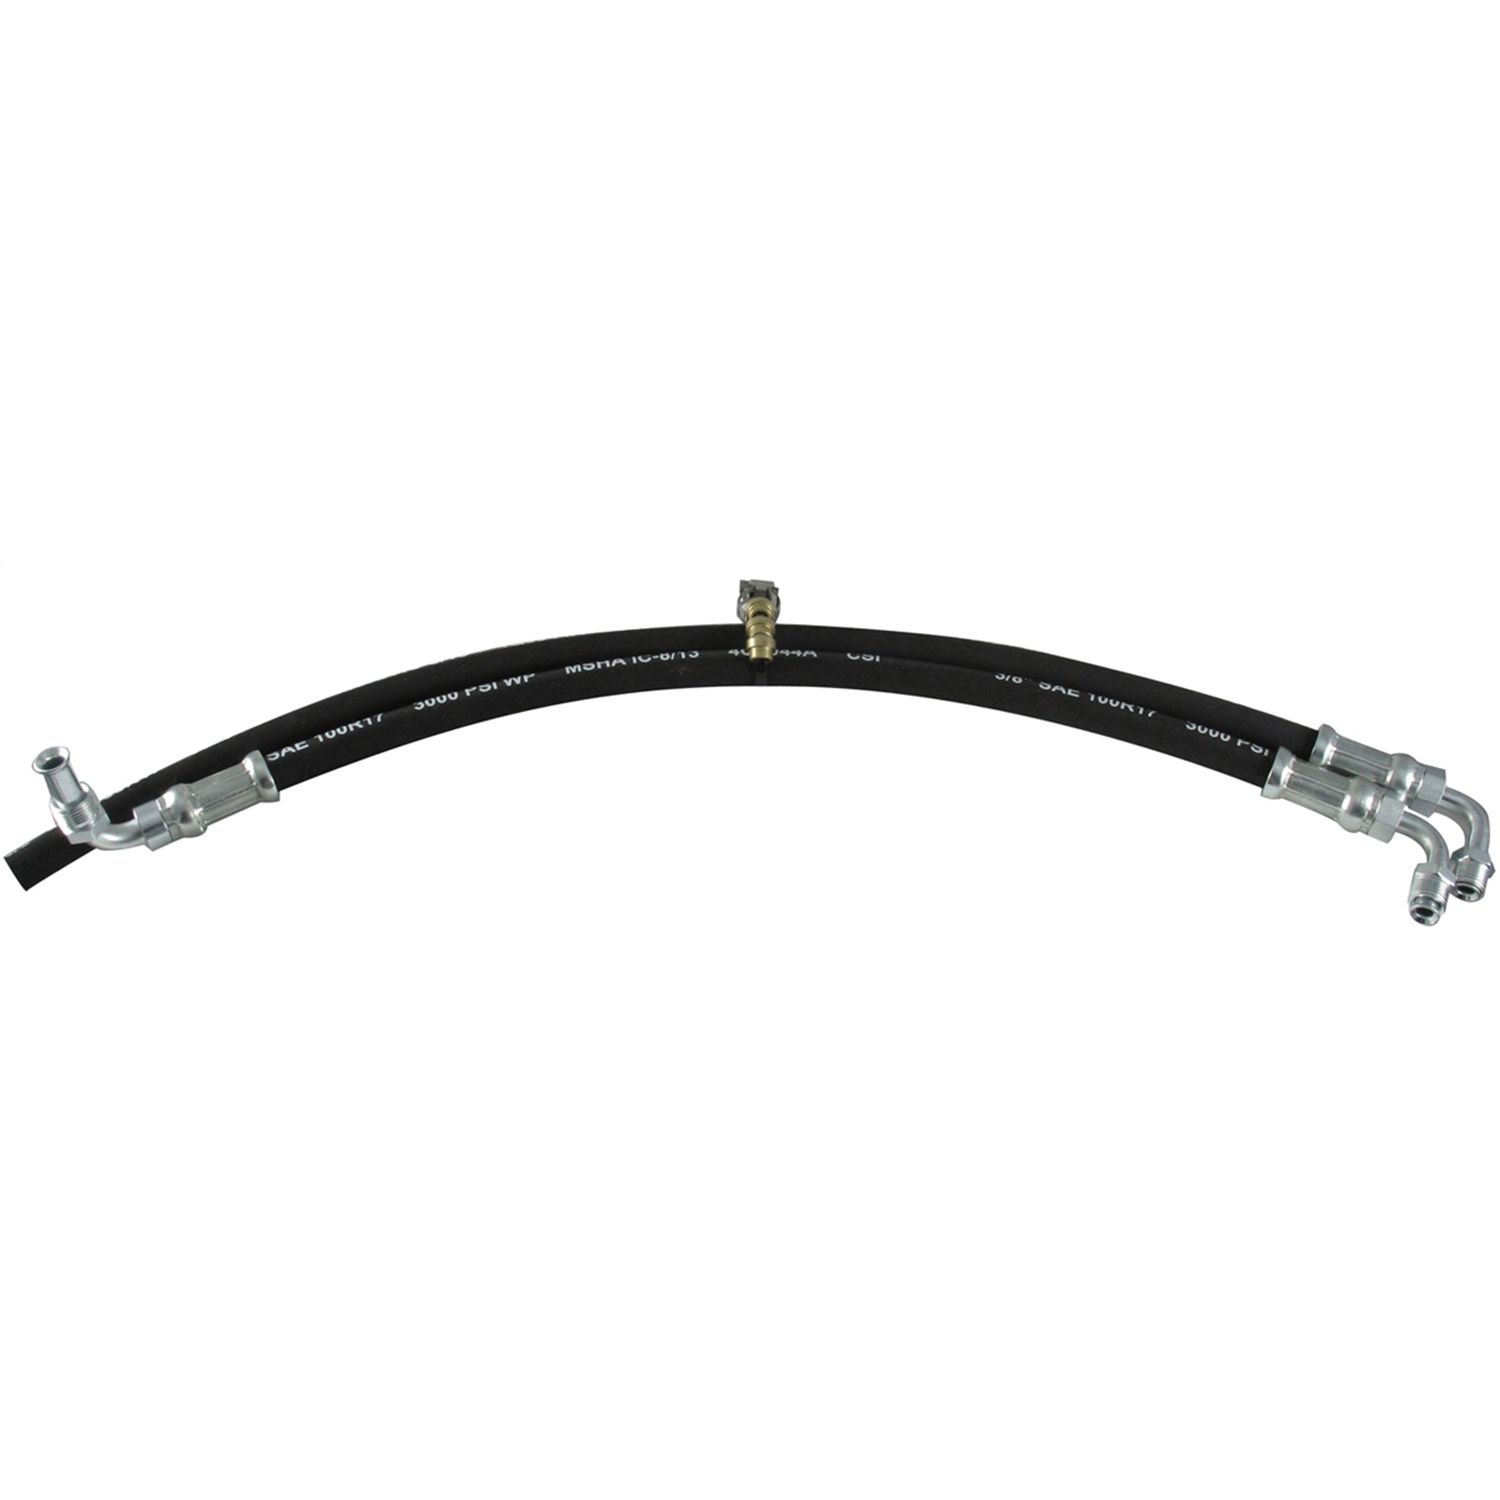 Borgeson - Power Steering Hose Kit - P/N: 925103 - 2 Piece OEM style rubber power steering hose kit. Connects GM power steering pump to a GM power steering box.